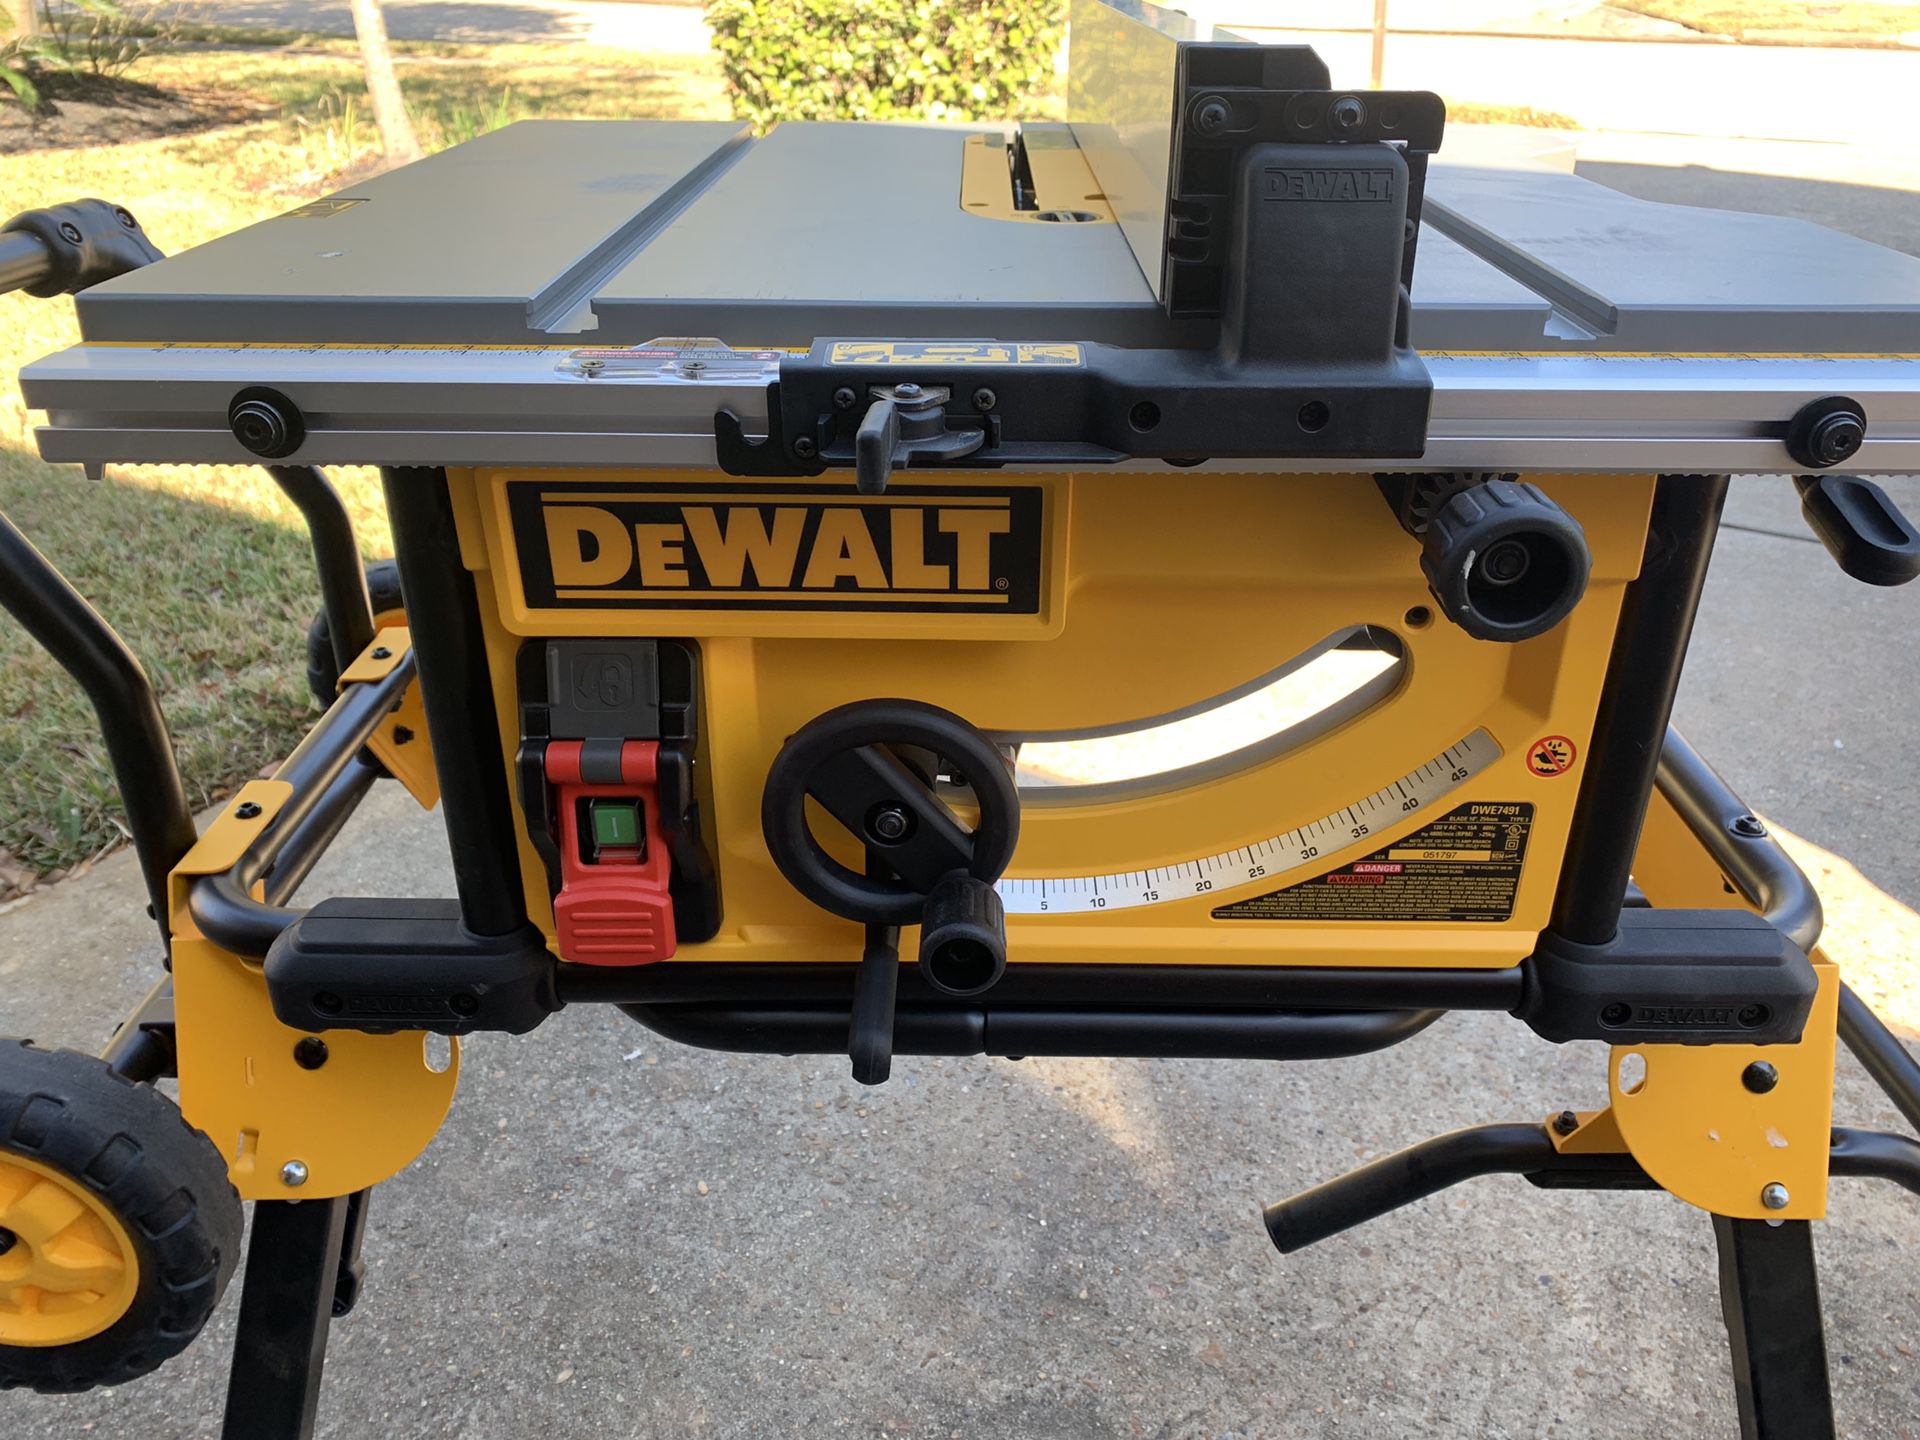 DEWALT 15-Amp Corded 10 in. Job Site Table Saw with Rolling Stand - comes as pictured - NEW